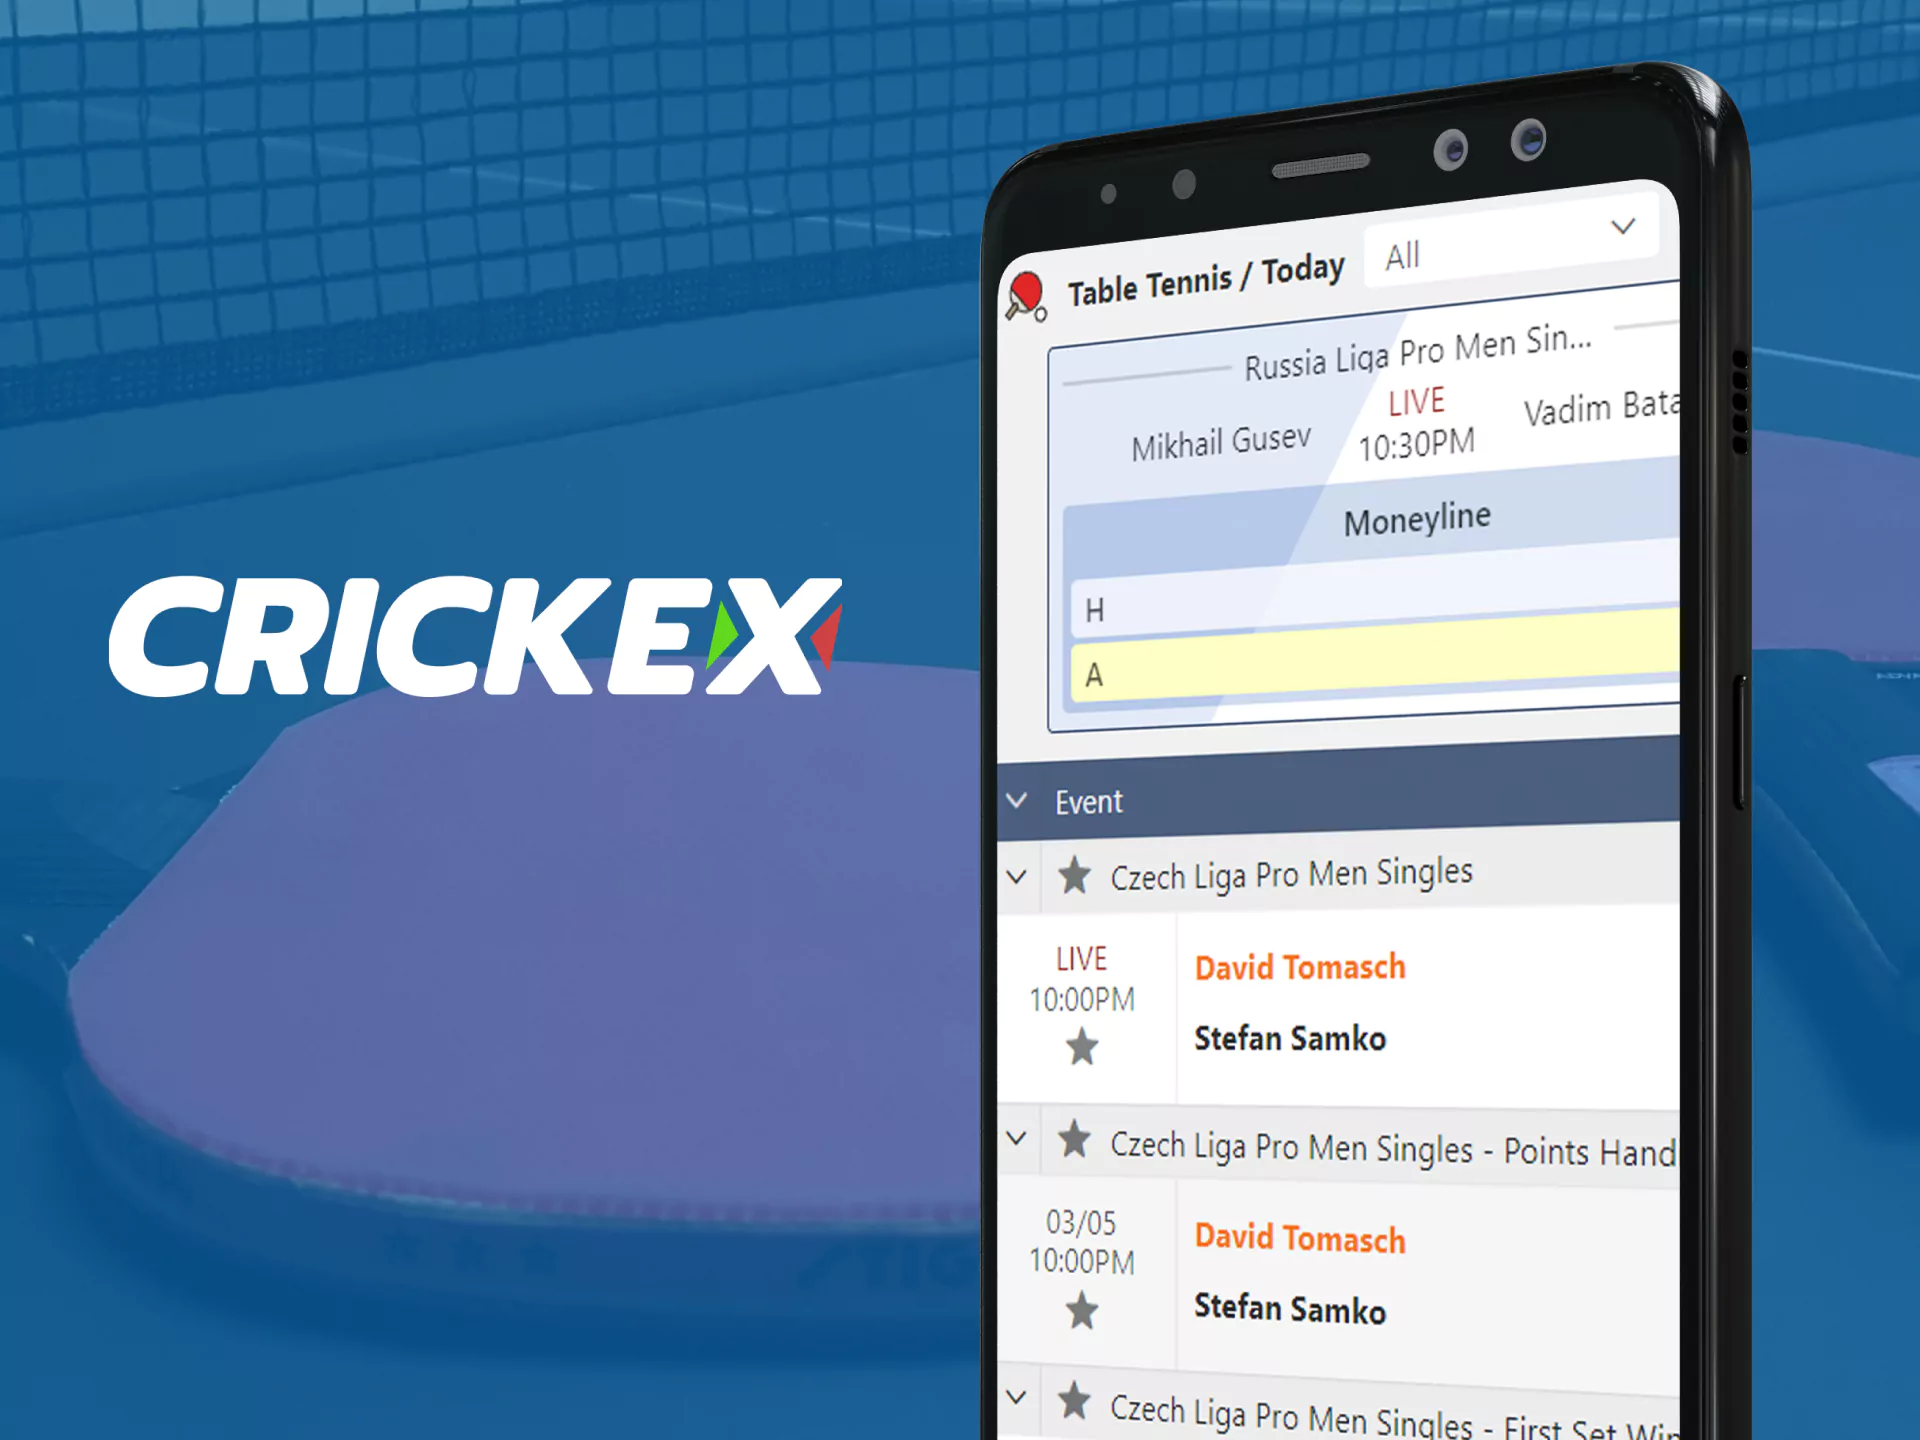 For table tennis betting, you can use Crickex on your phone.